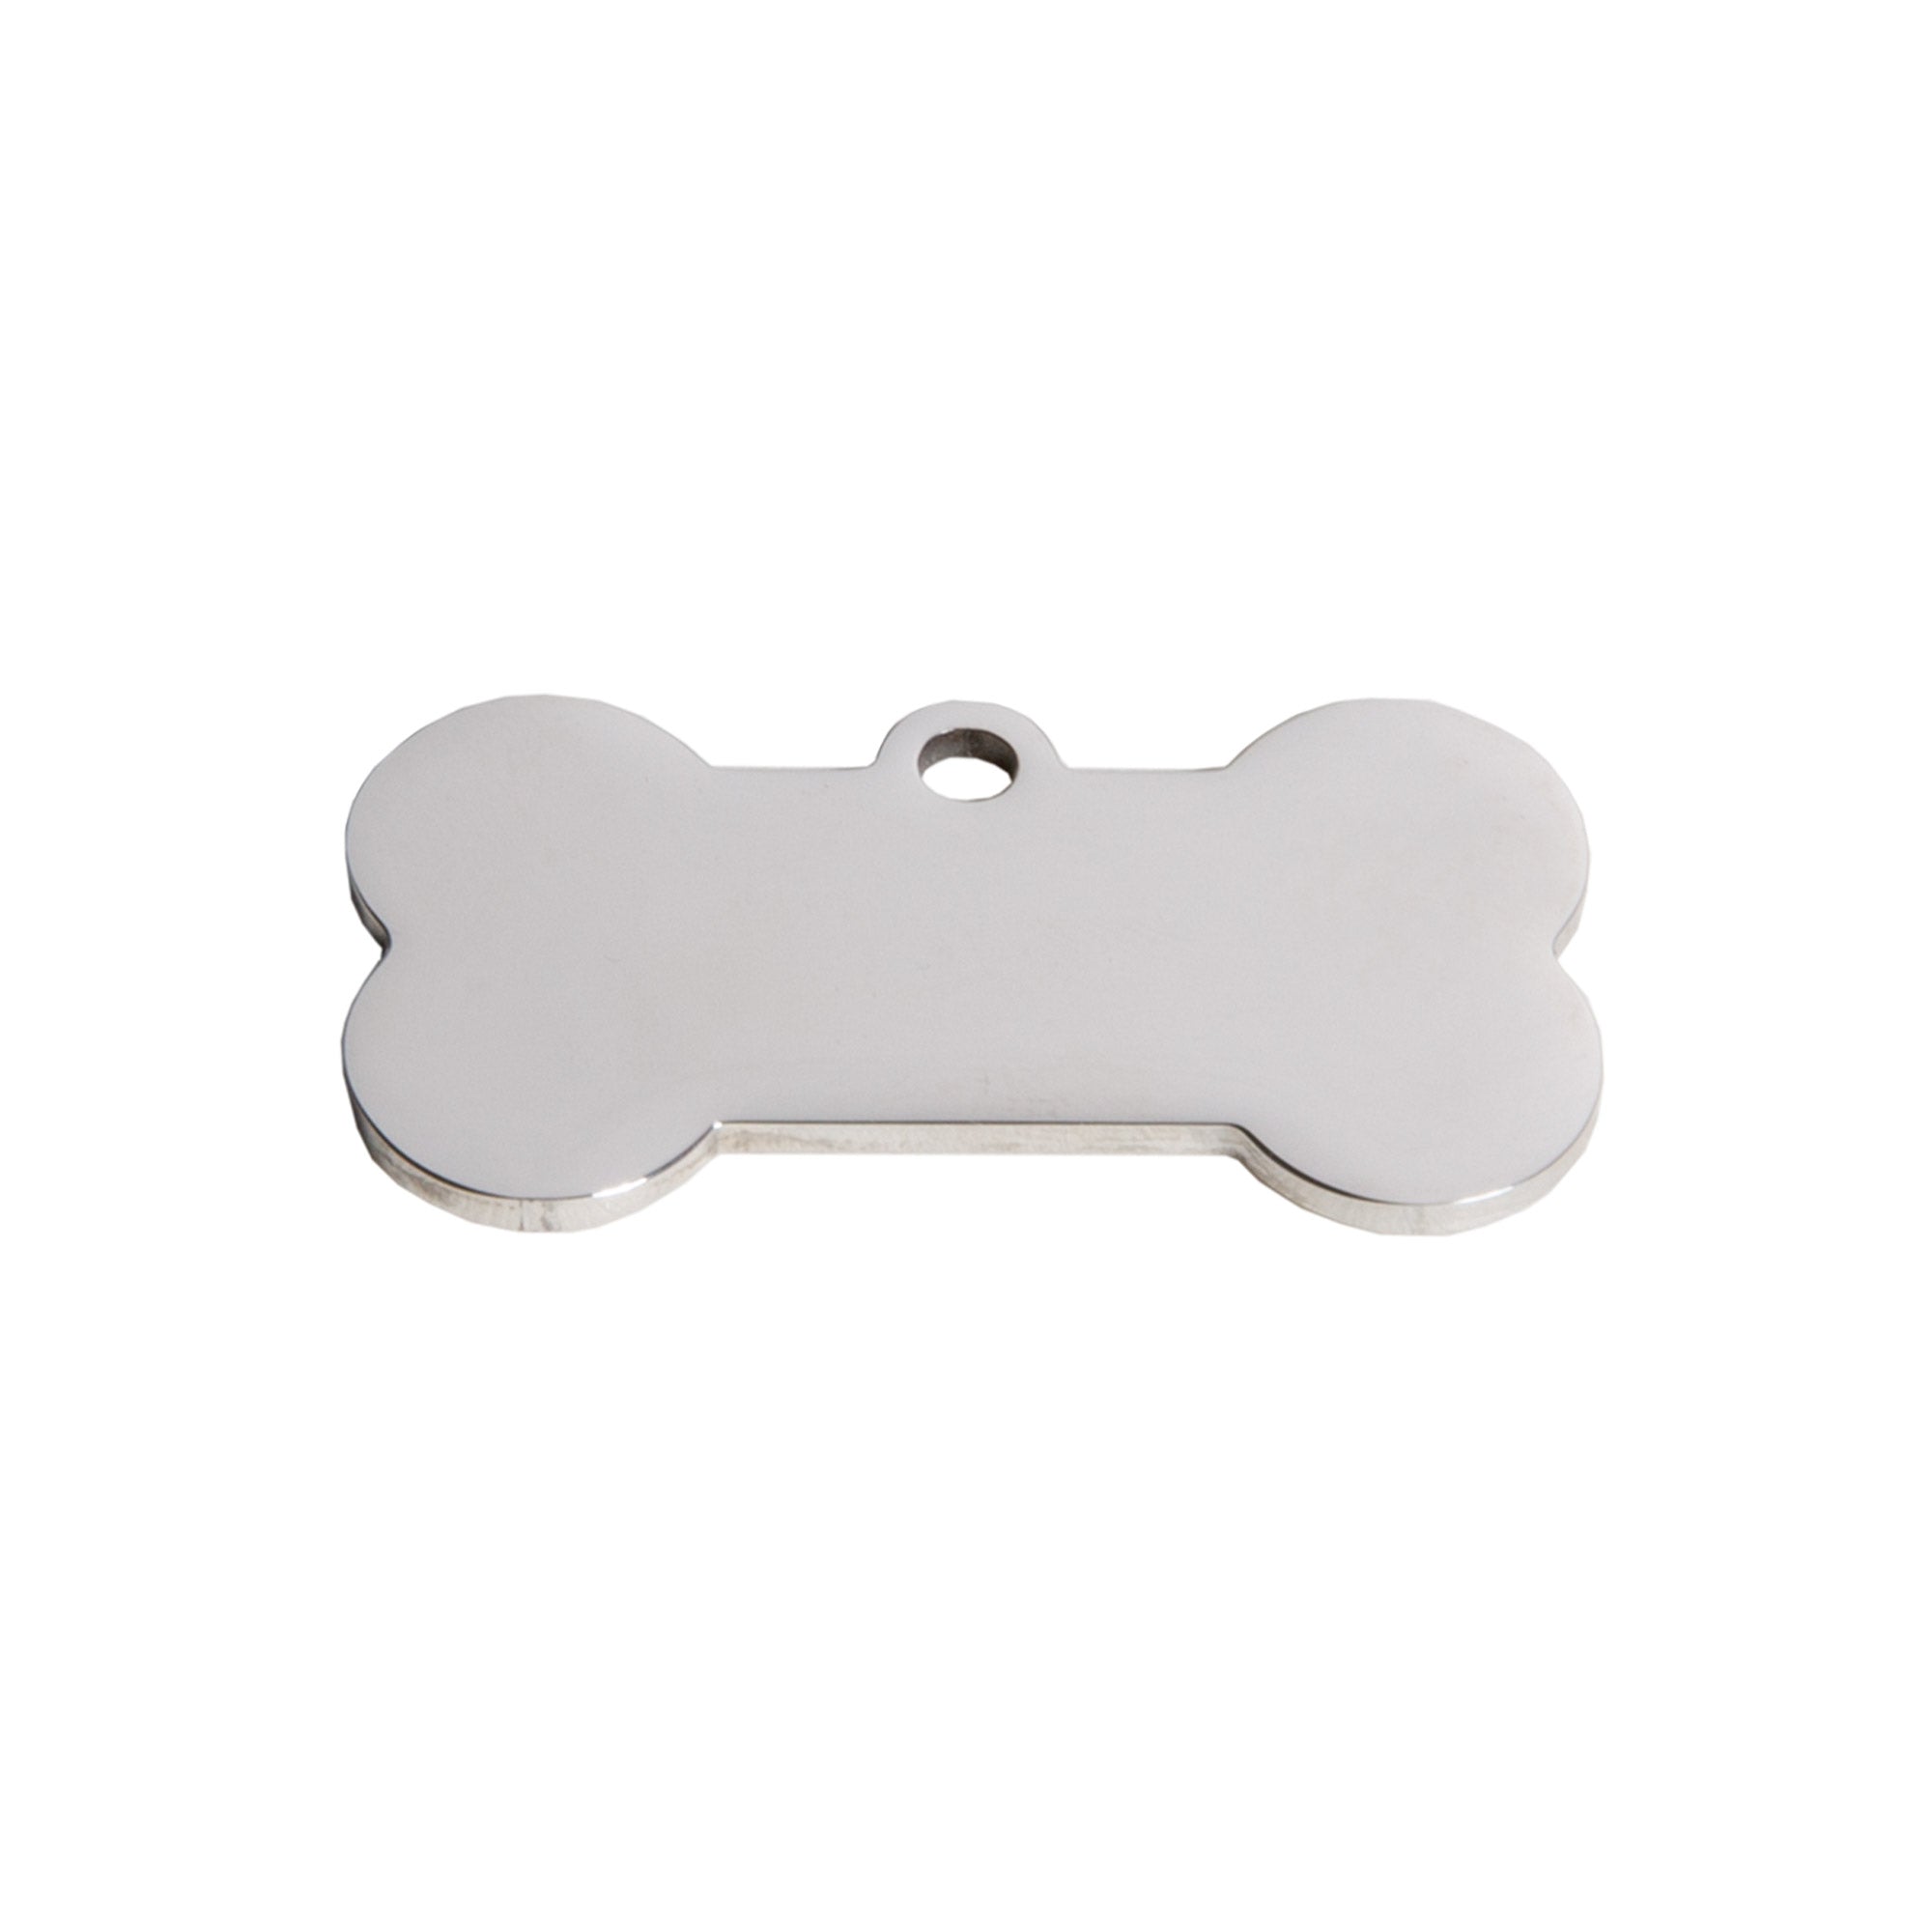 Stainless Steel Tag for Laser Engraving (10pcs)